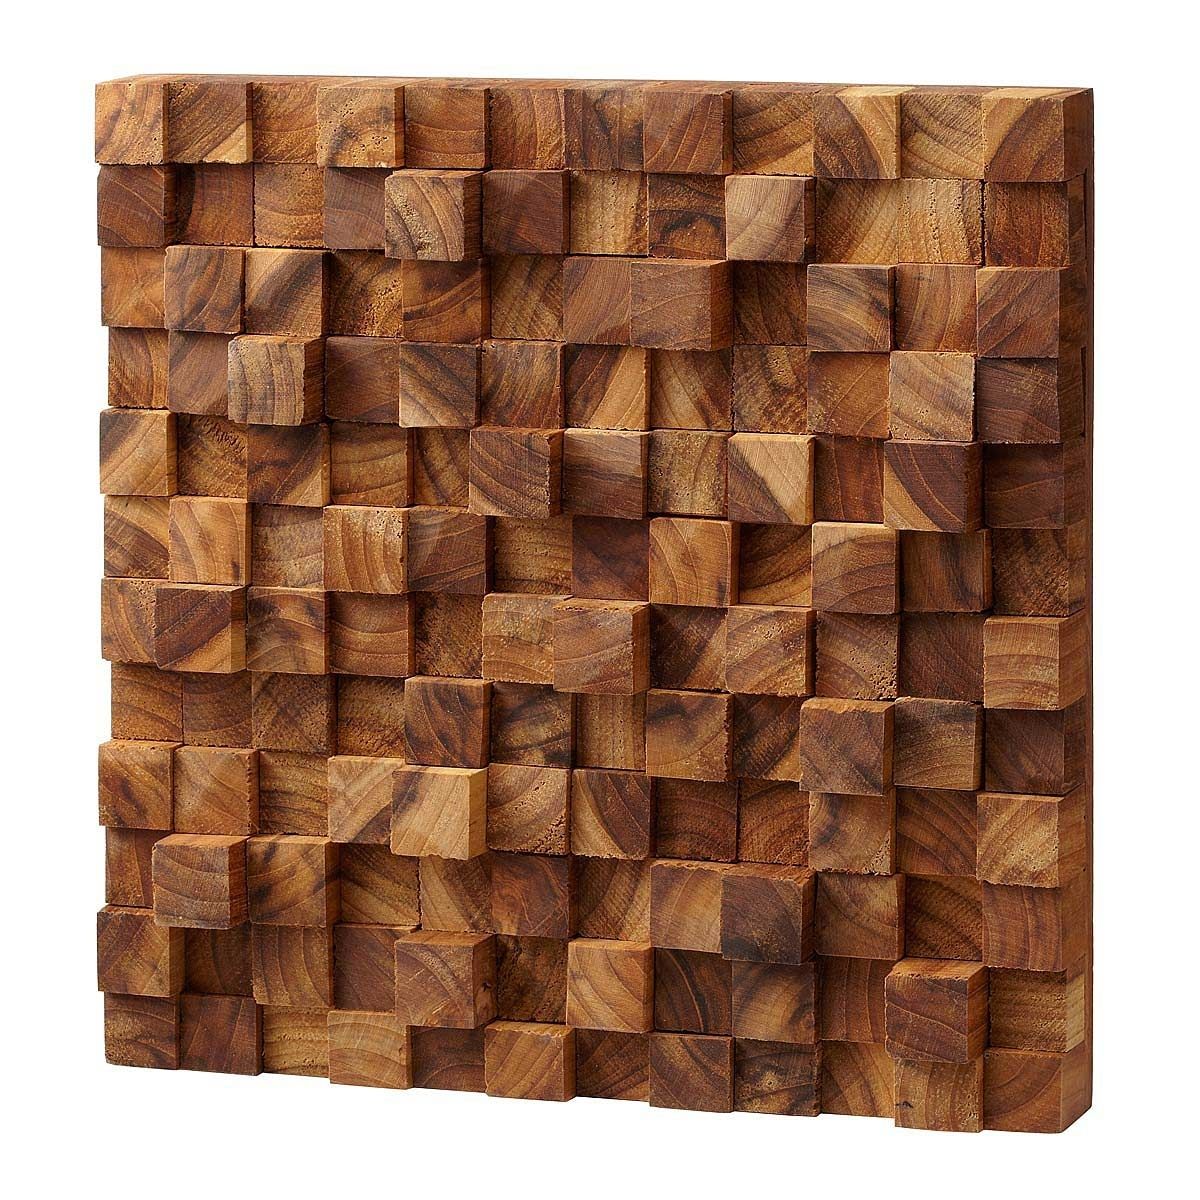 Square Takara Wall Art | Teak Wood, 3d Art | Uncommongoods For Recent Wood Art Wall (View 1 of 15)